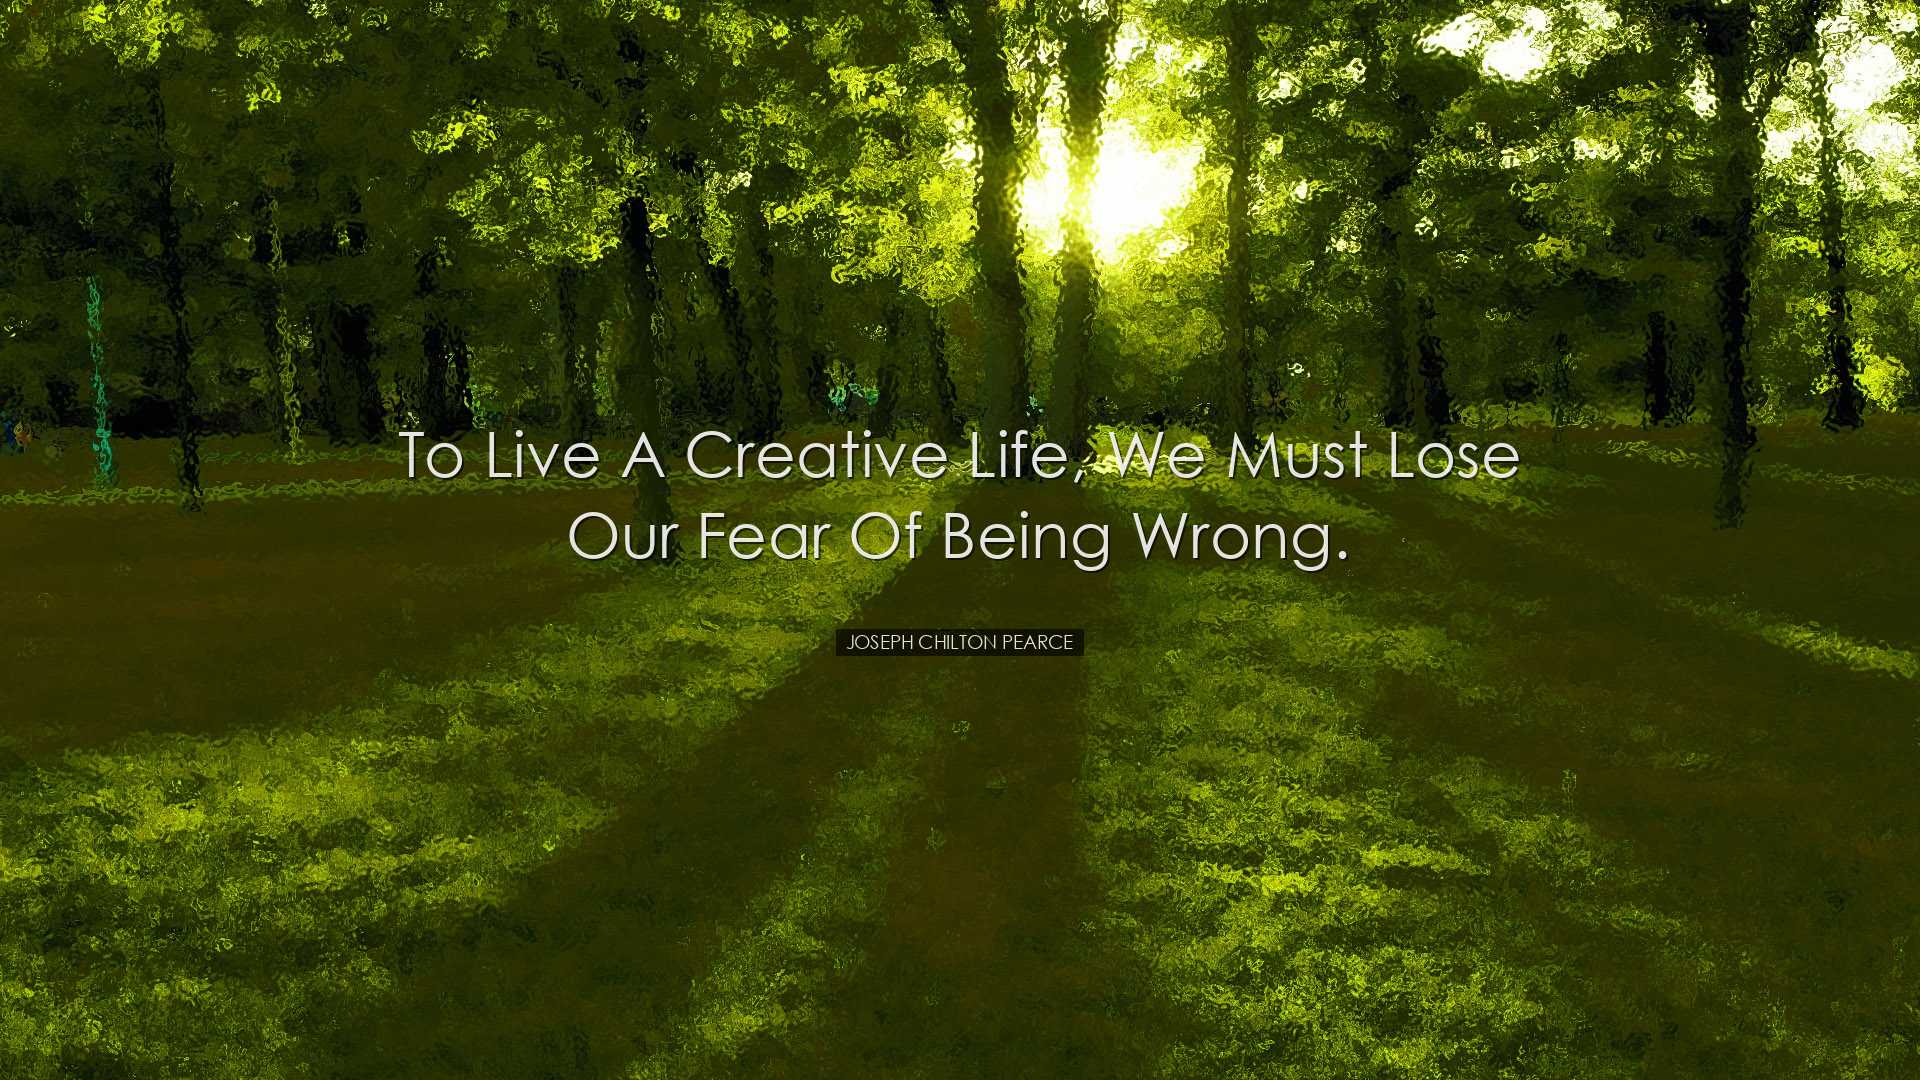 To live a creative life, we must lose our fear of being wrong. - J